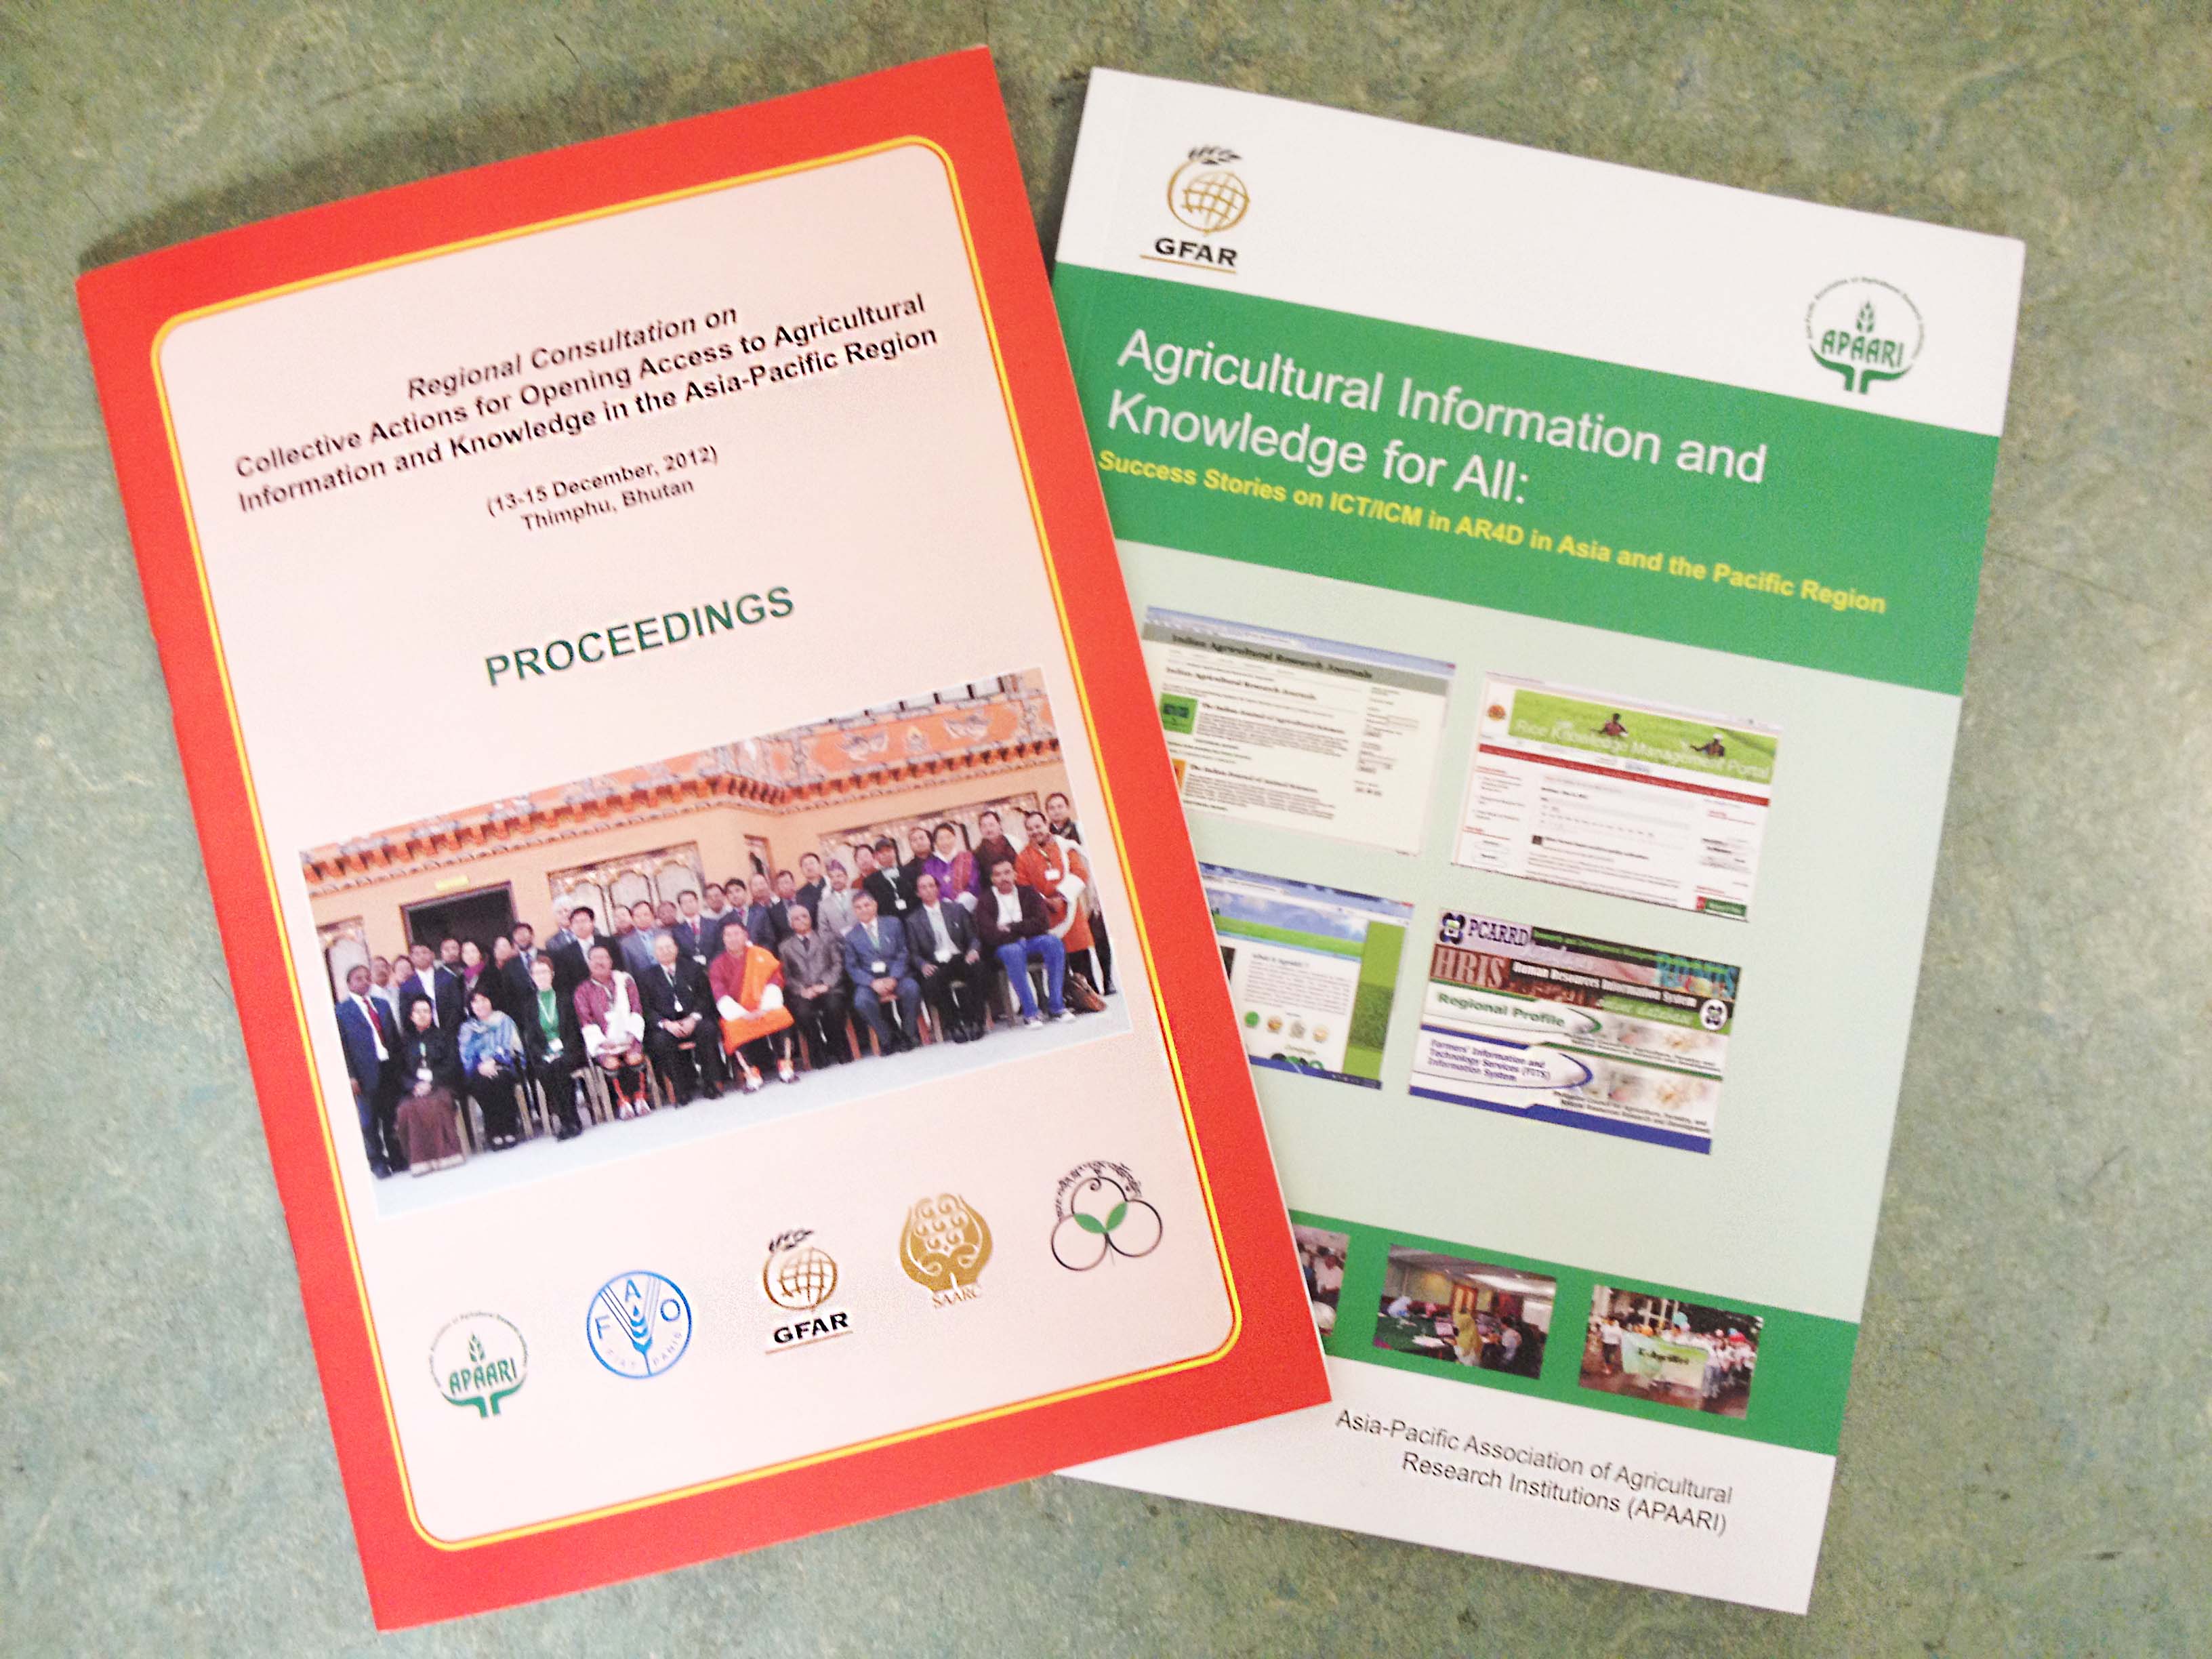 Agricultural Information and Knowledge for All